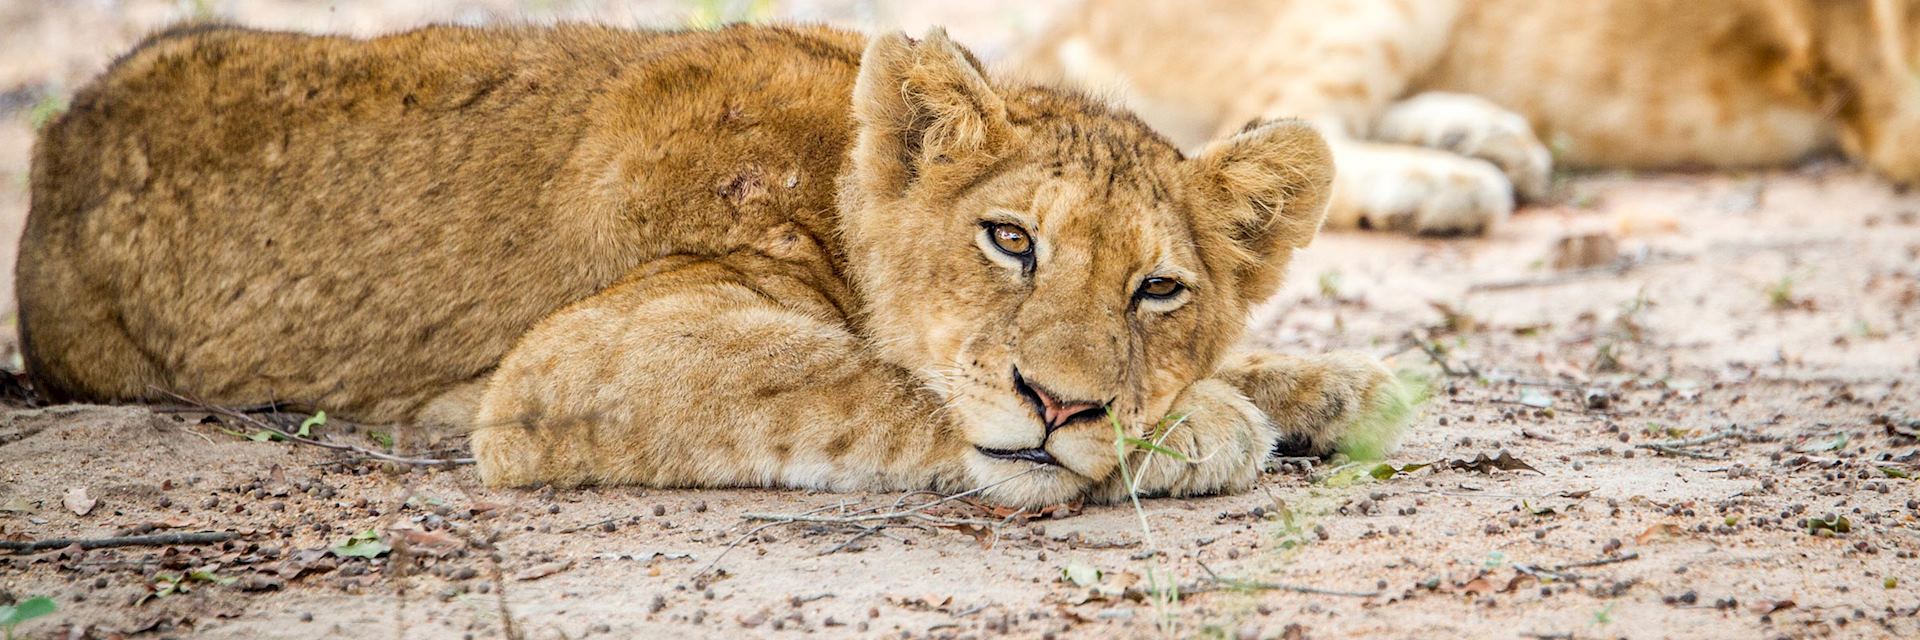 Lion cub in Kapama Private Game Reserve